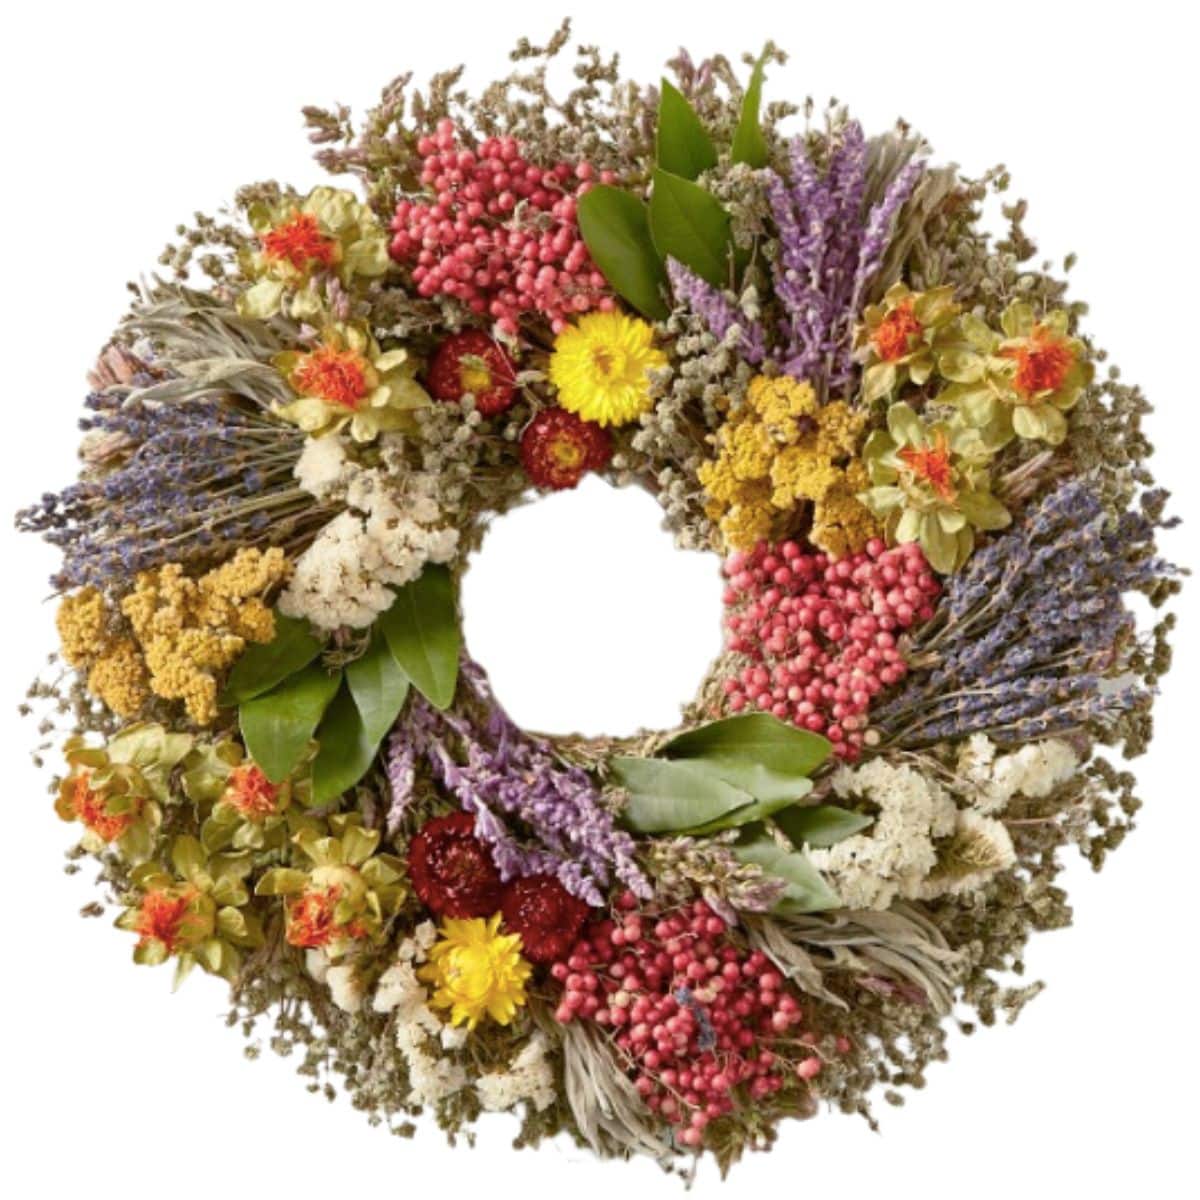 Farmers' Market Herb Live Wreath in a rainbow of colors from williams sonoma. 